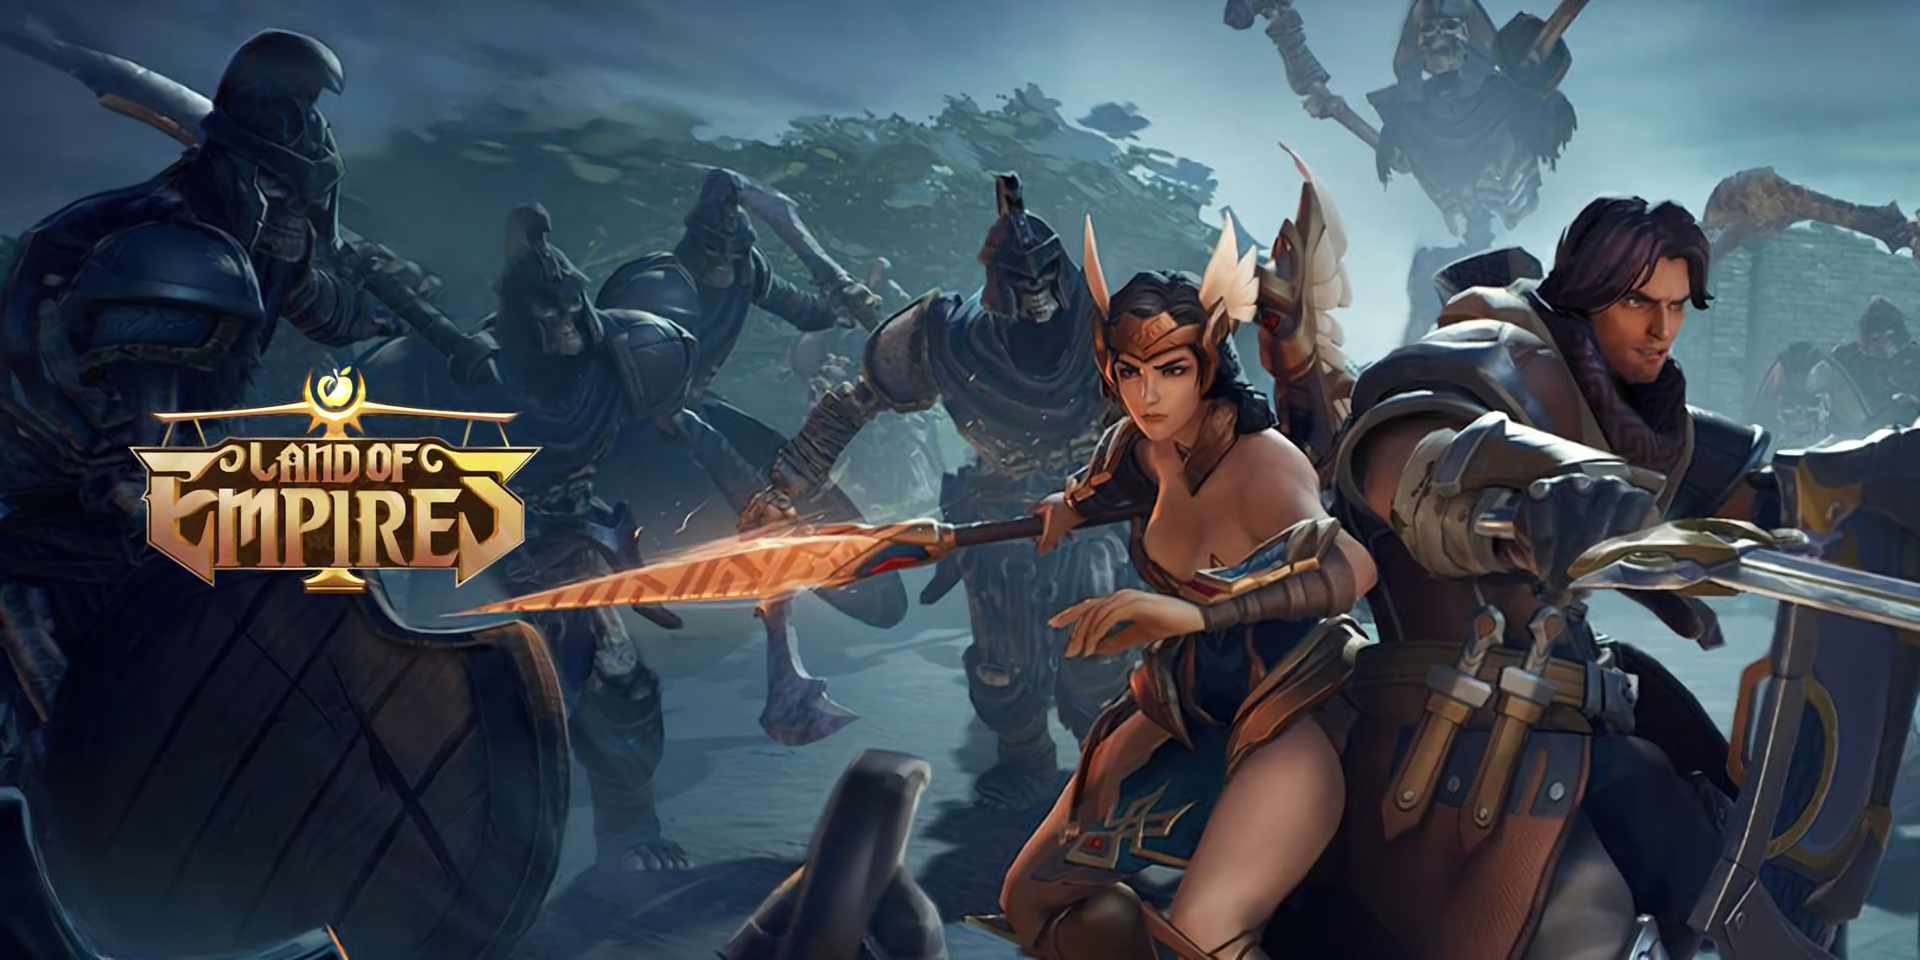 how to play land of empires immortal on pc, how to play land of empires immortal on mac